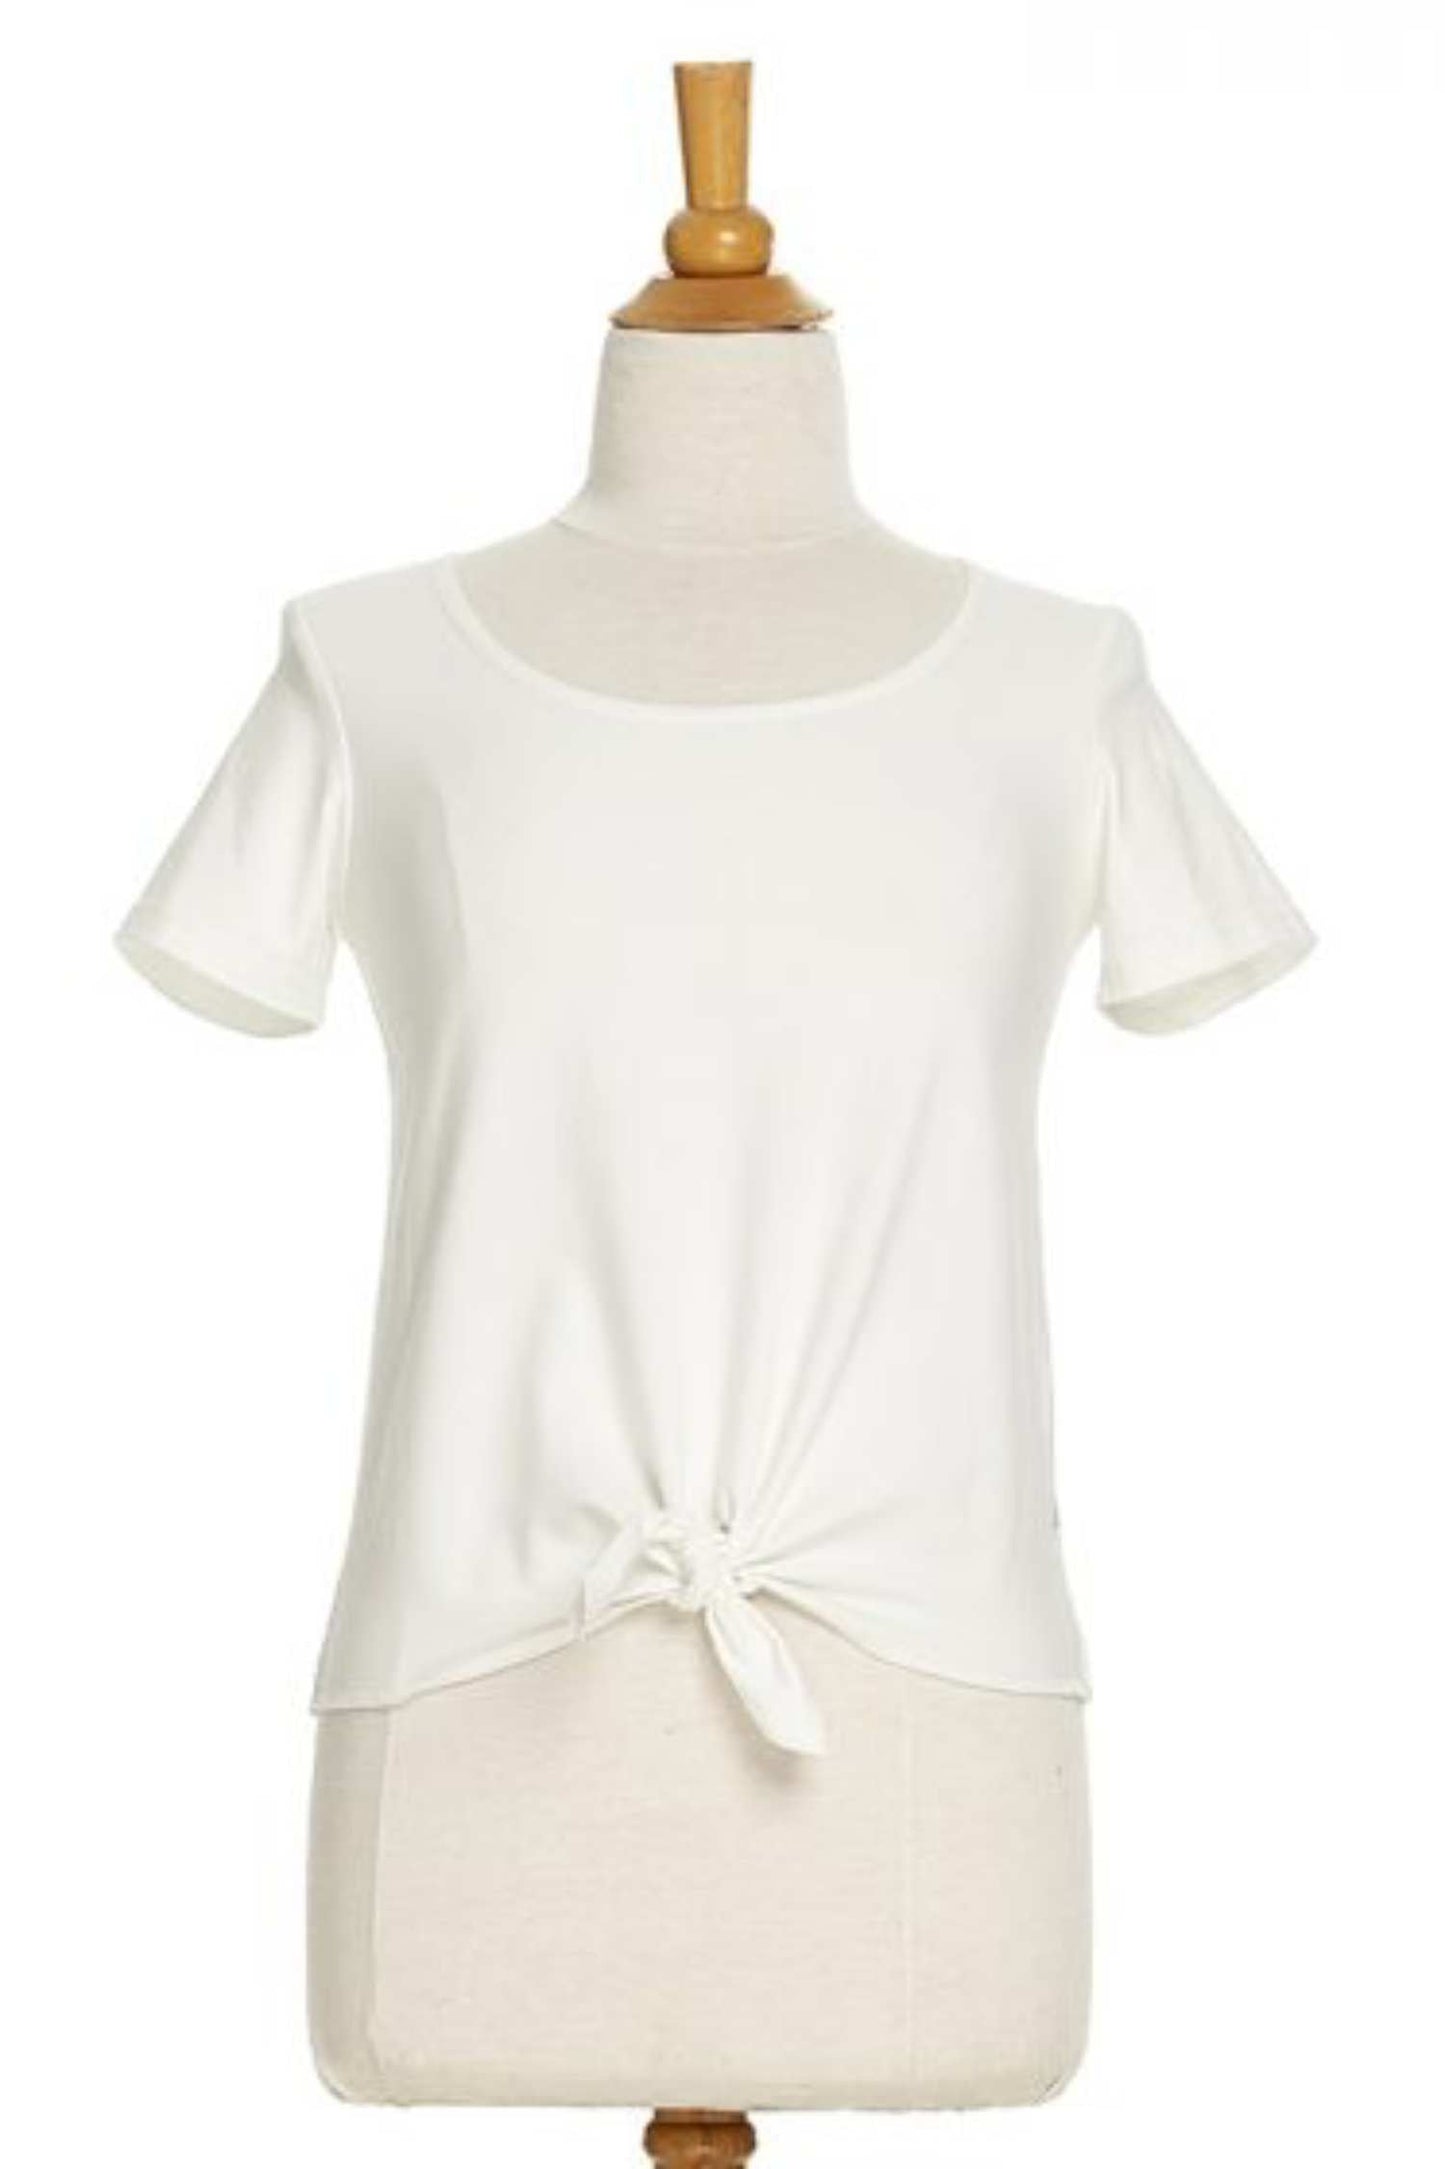 Camelia T-Shirt by Rien ne se Perd, White, scoop neck, short sleeves, front tie, sizes XS to XXL, made in Quebec